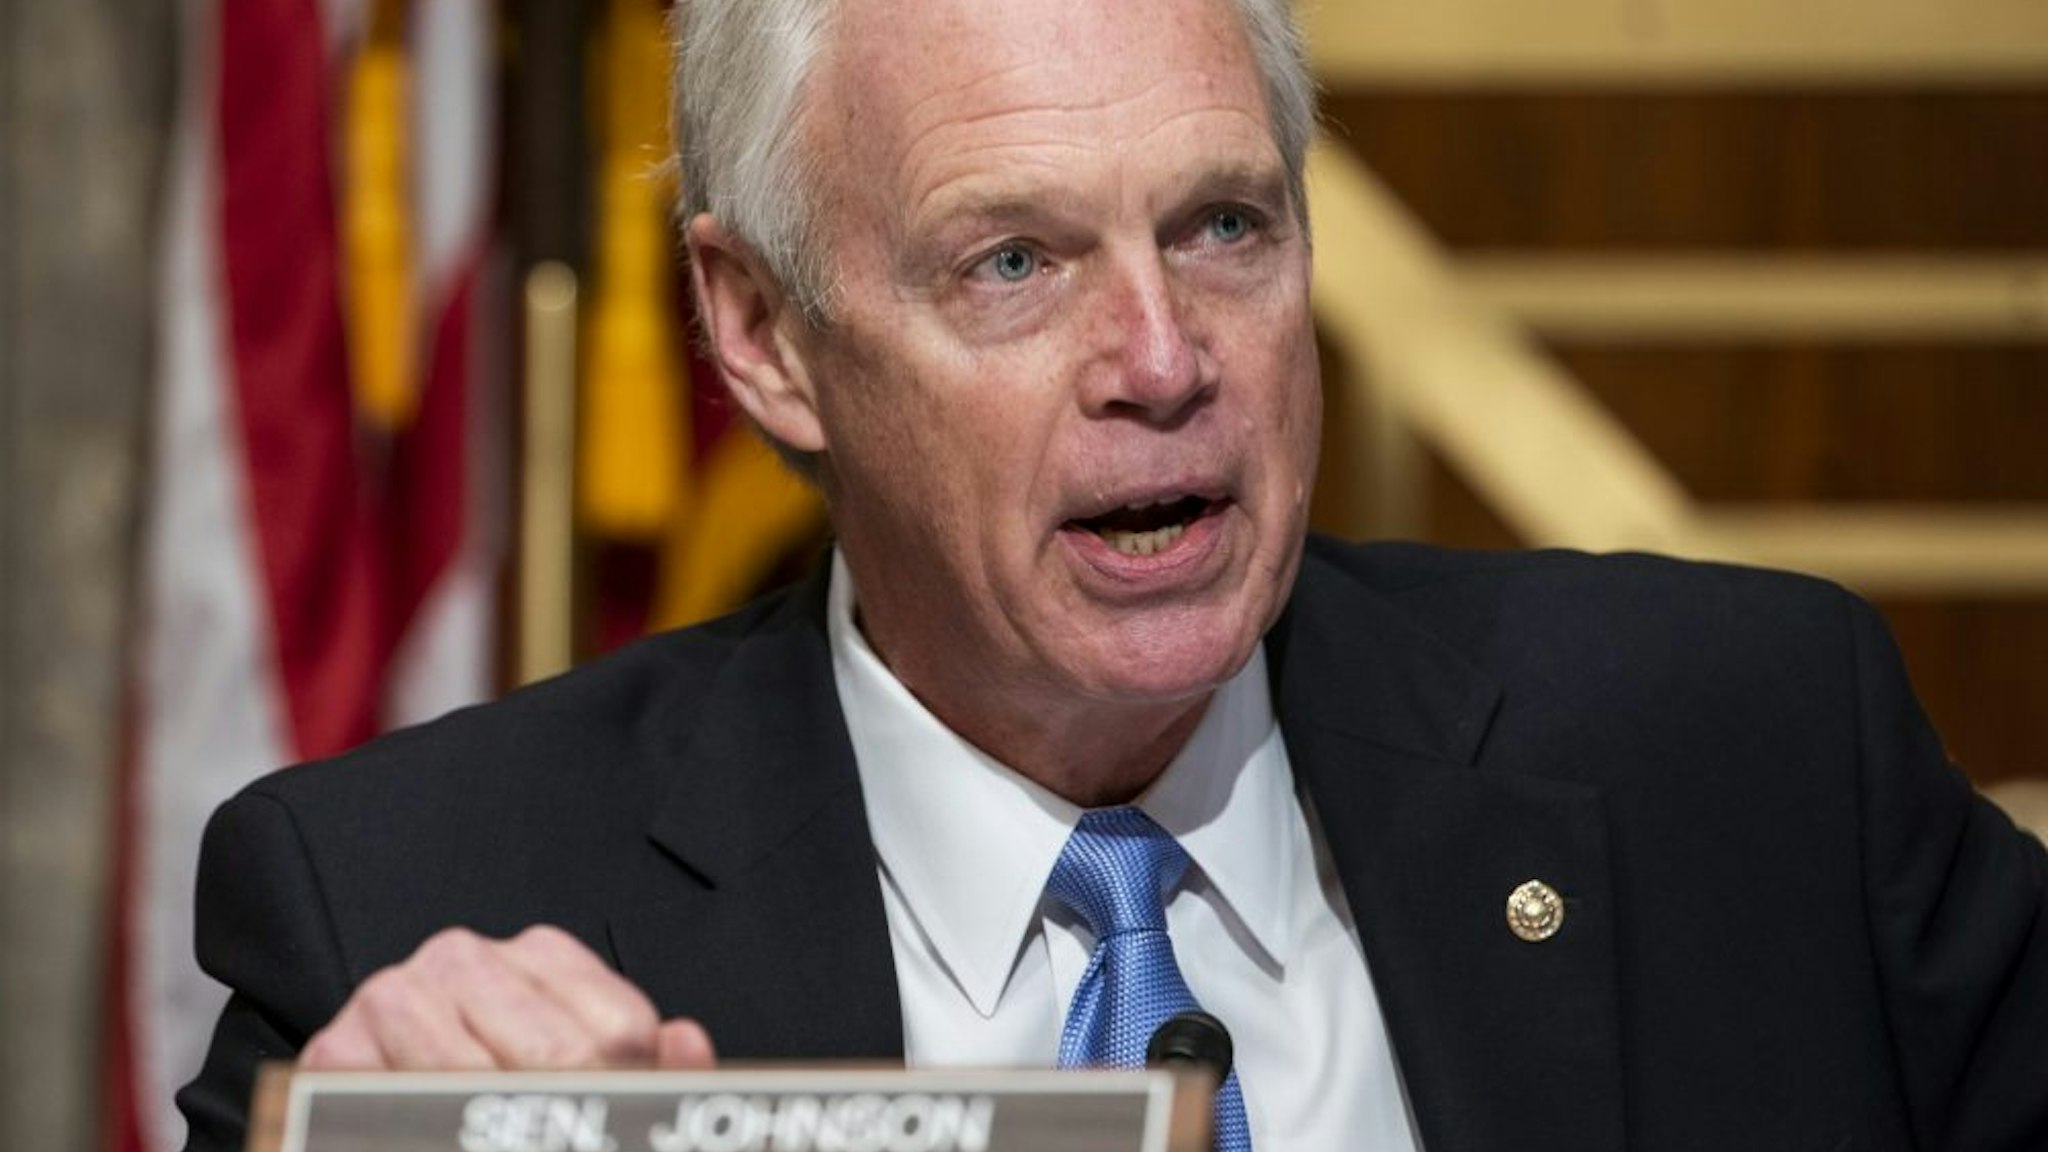 WASHINGTON, DC - DECEMBER 16: Senate Homeland Security and Governmental Affairs Committee Chairman, Sen. Ron Johnson (R-WI) argues with Democratic Senator from Michigan Gary Peters (not pictured) during a hearing to examine claims of voter irregularities in the 2020 election in the Dirksen Senate Office Building on December 16, 2020 in Washington, DC. U.S. President Donald Trump continues to push baseless claims of voter fraud during the presidential election, which the Department of Homeland Security called the most secure in American history.